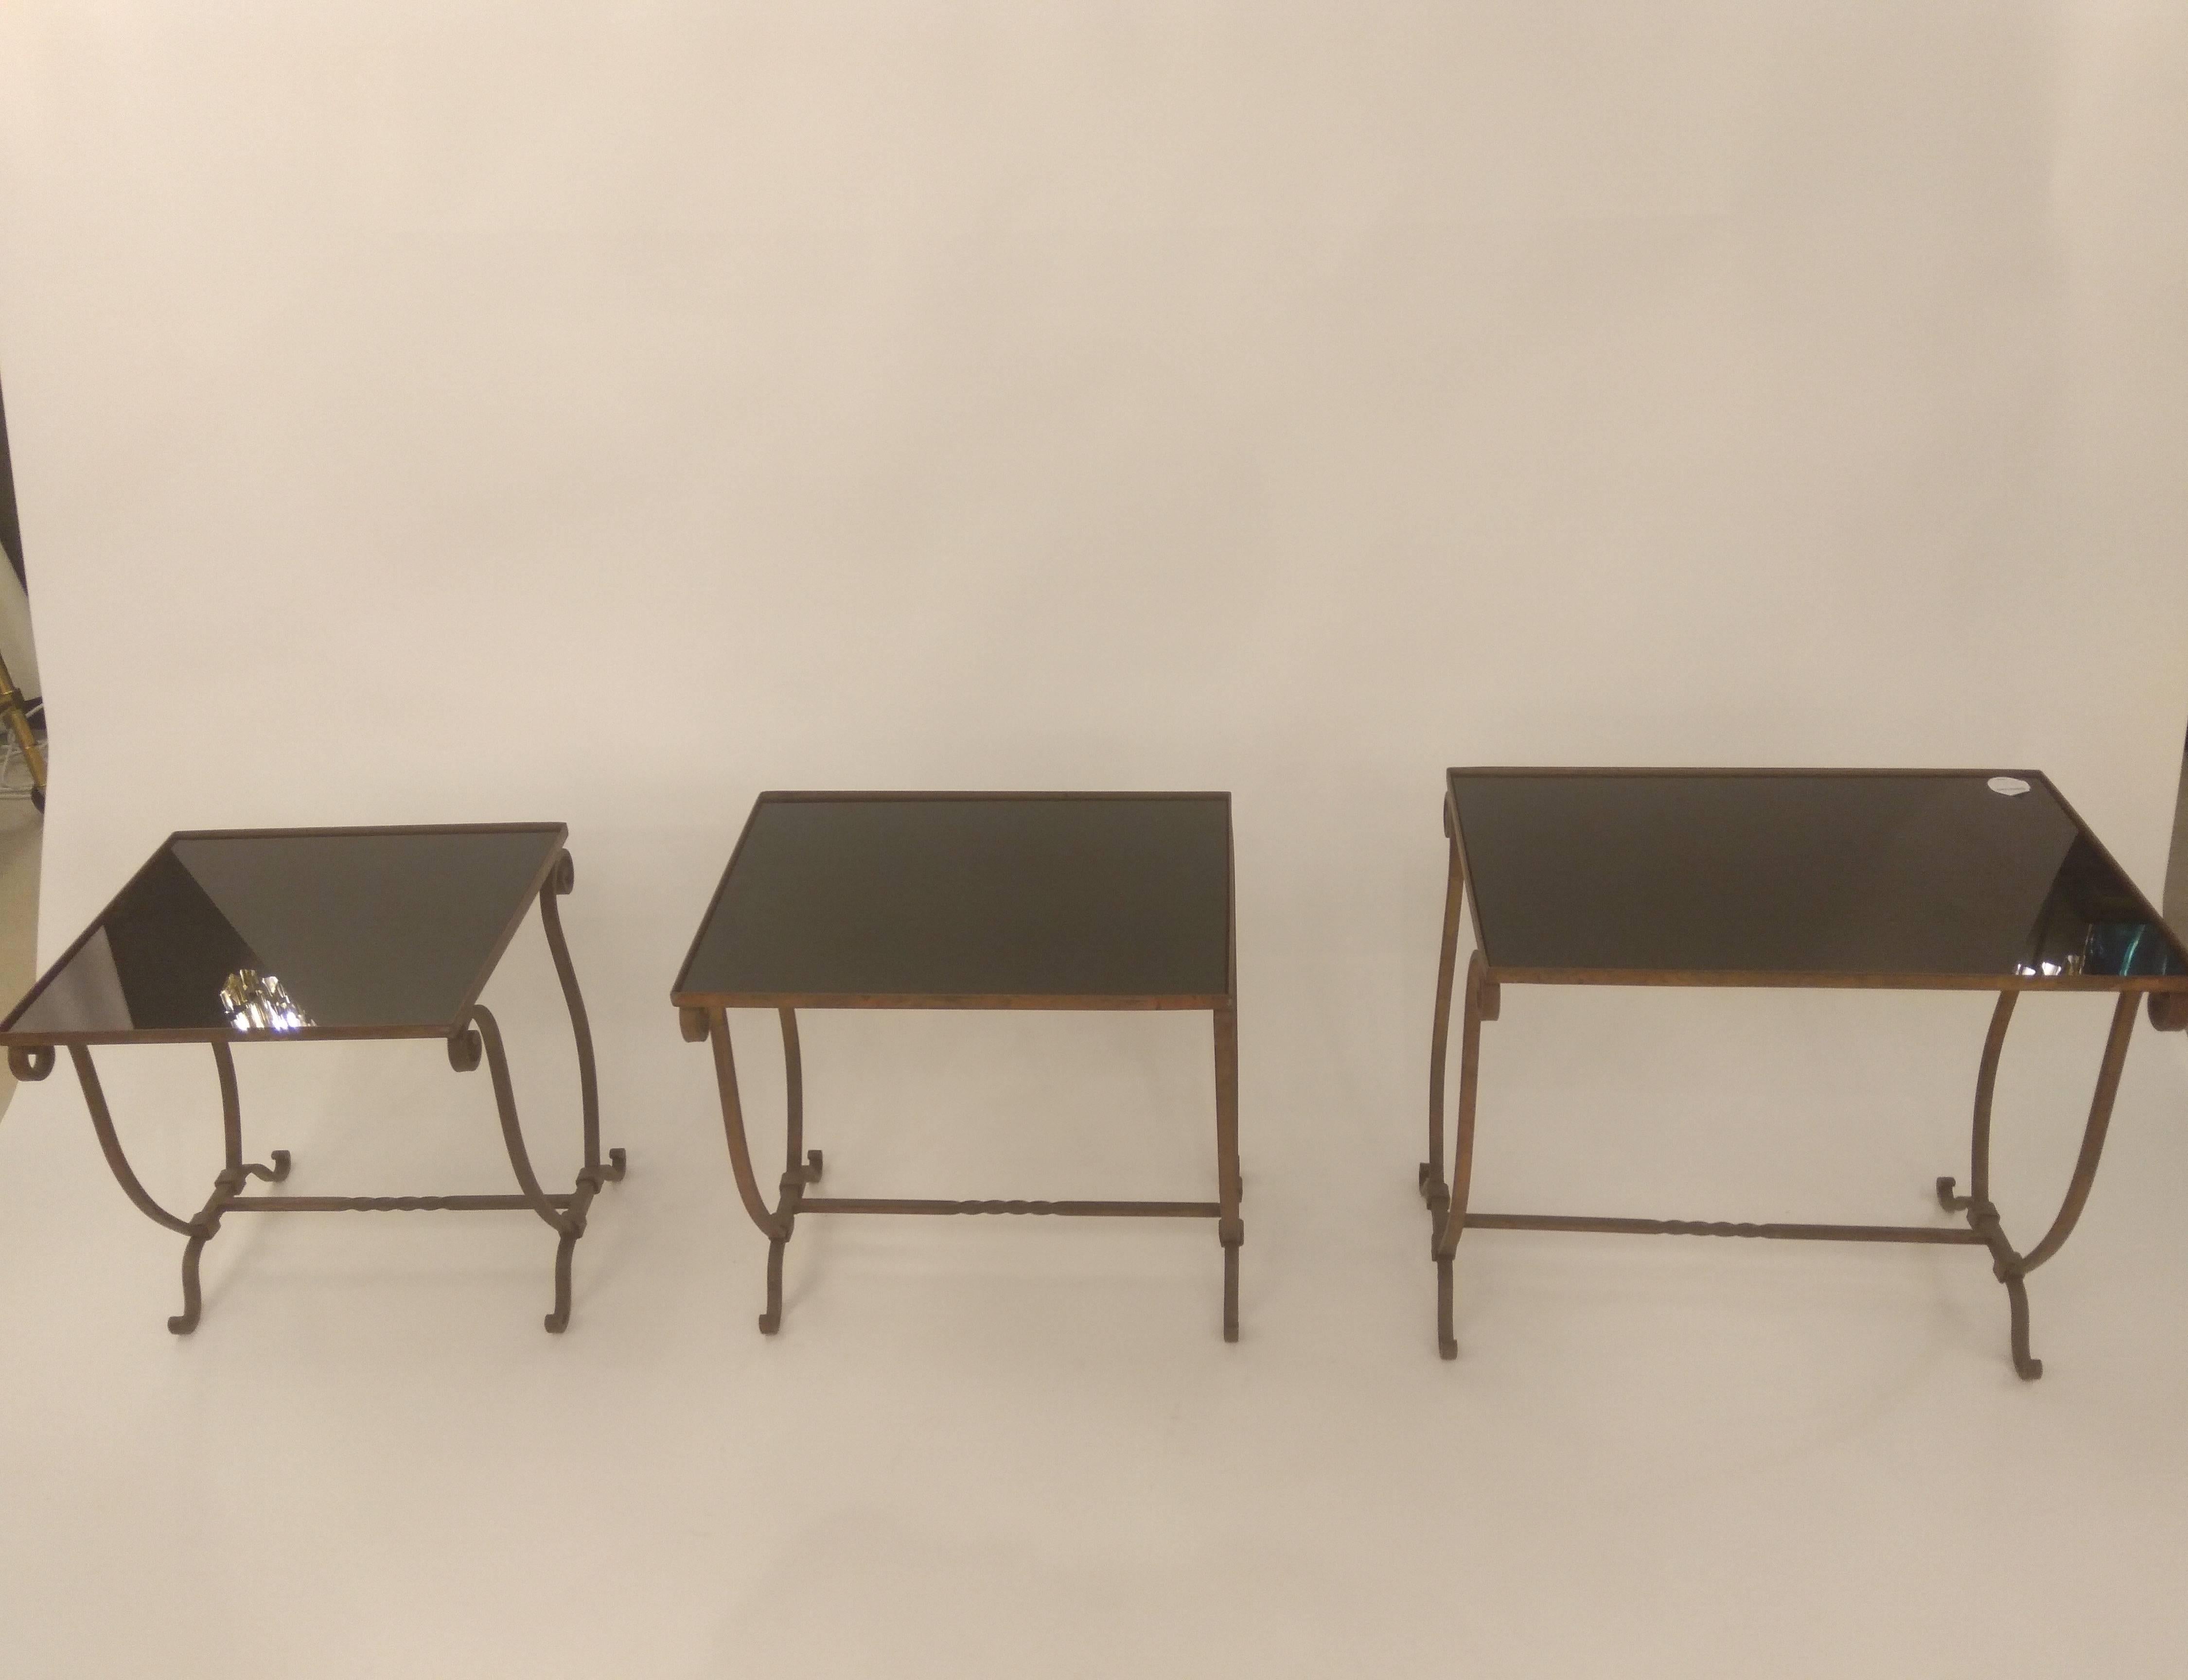 20th Century Italian Designed Nest of Three Tables Forged Iron with Black Glass, 1950